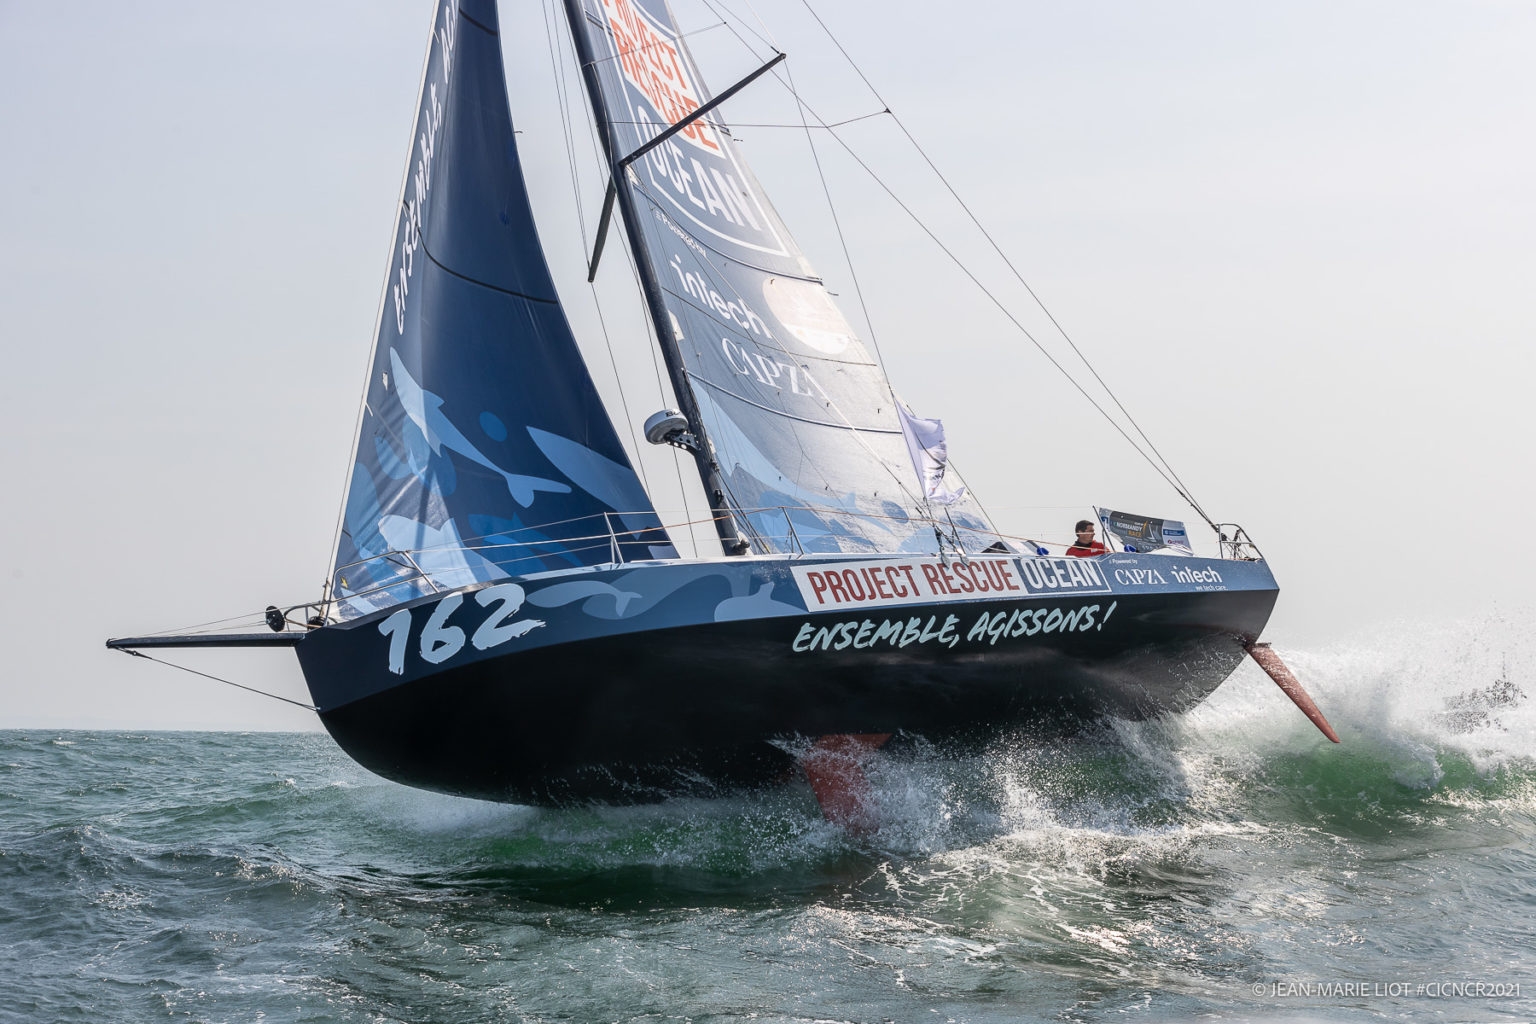  Class 40  Normandy Channel Race  Le Havre FRA  Day 4